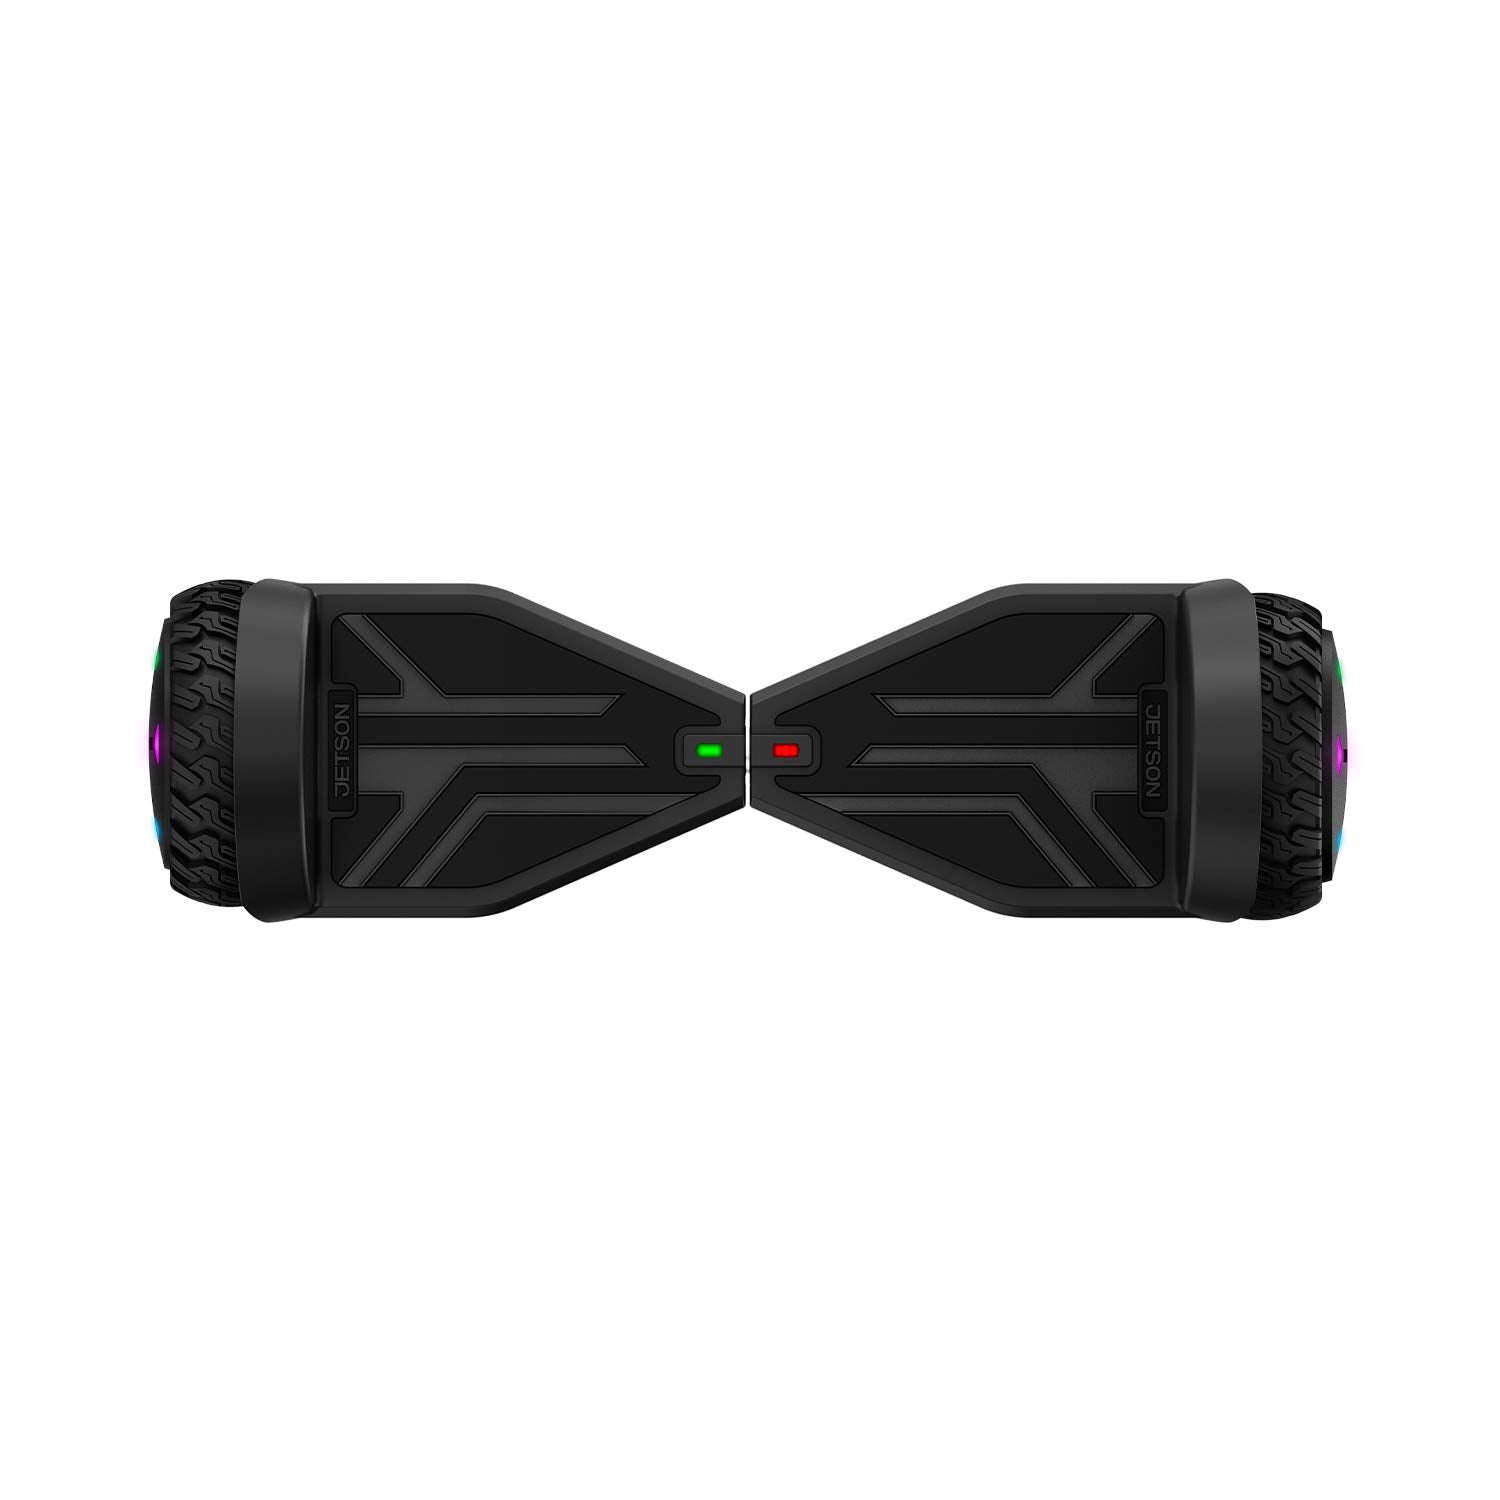 Jetson Spin All Terrain Hoverboard with LED Lights | Anti Slip Grip Pads | Self Balancing Hoverboard with Active Balance Technology | Range of Up to 7 Miles, Ages 13+